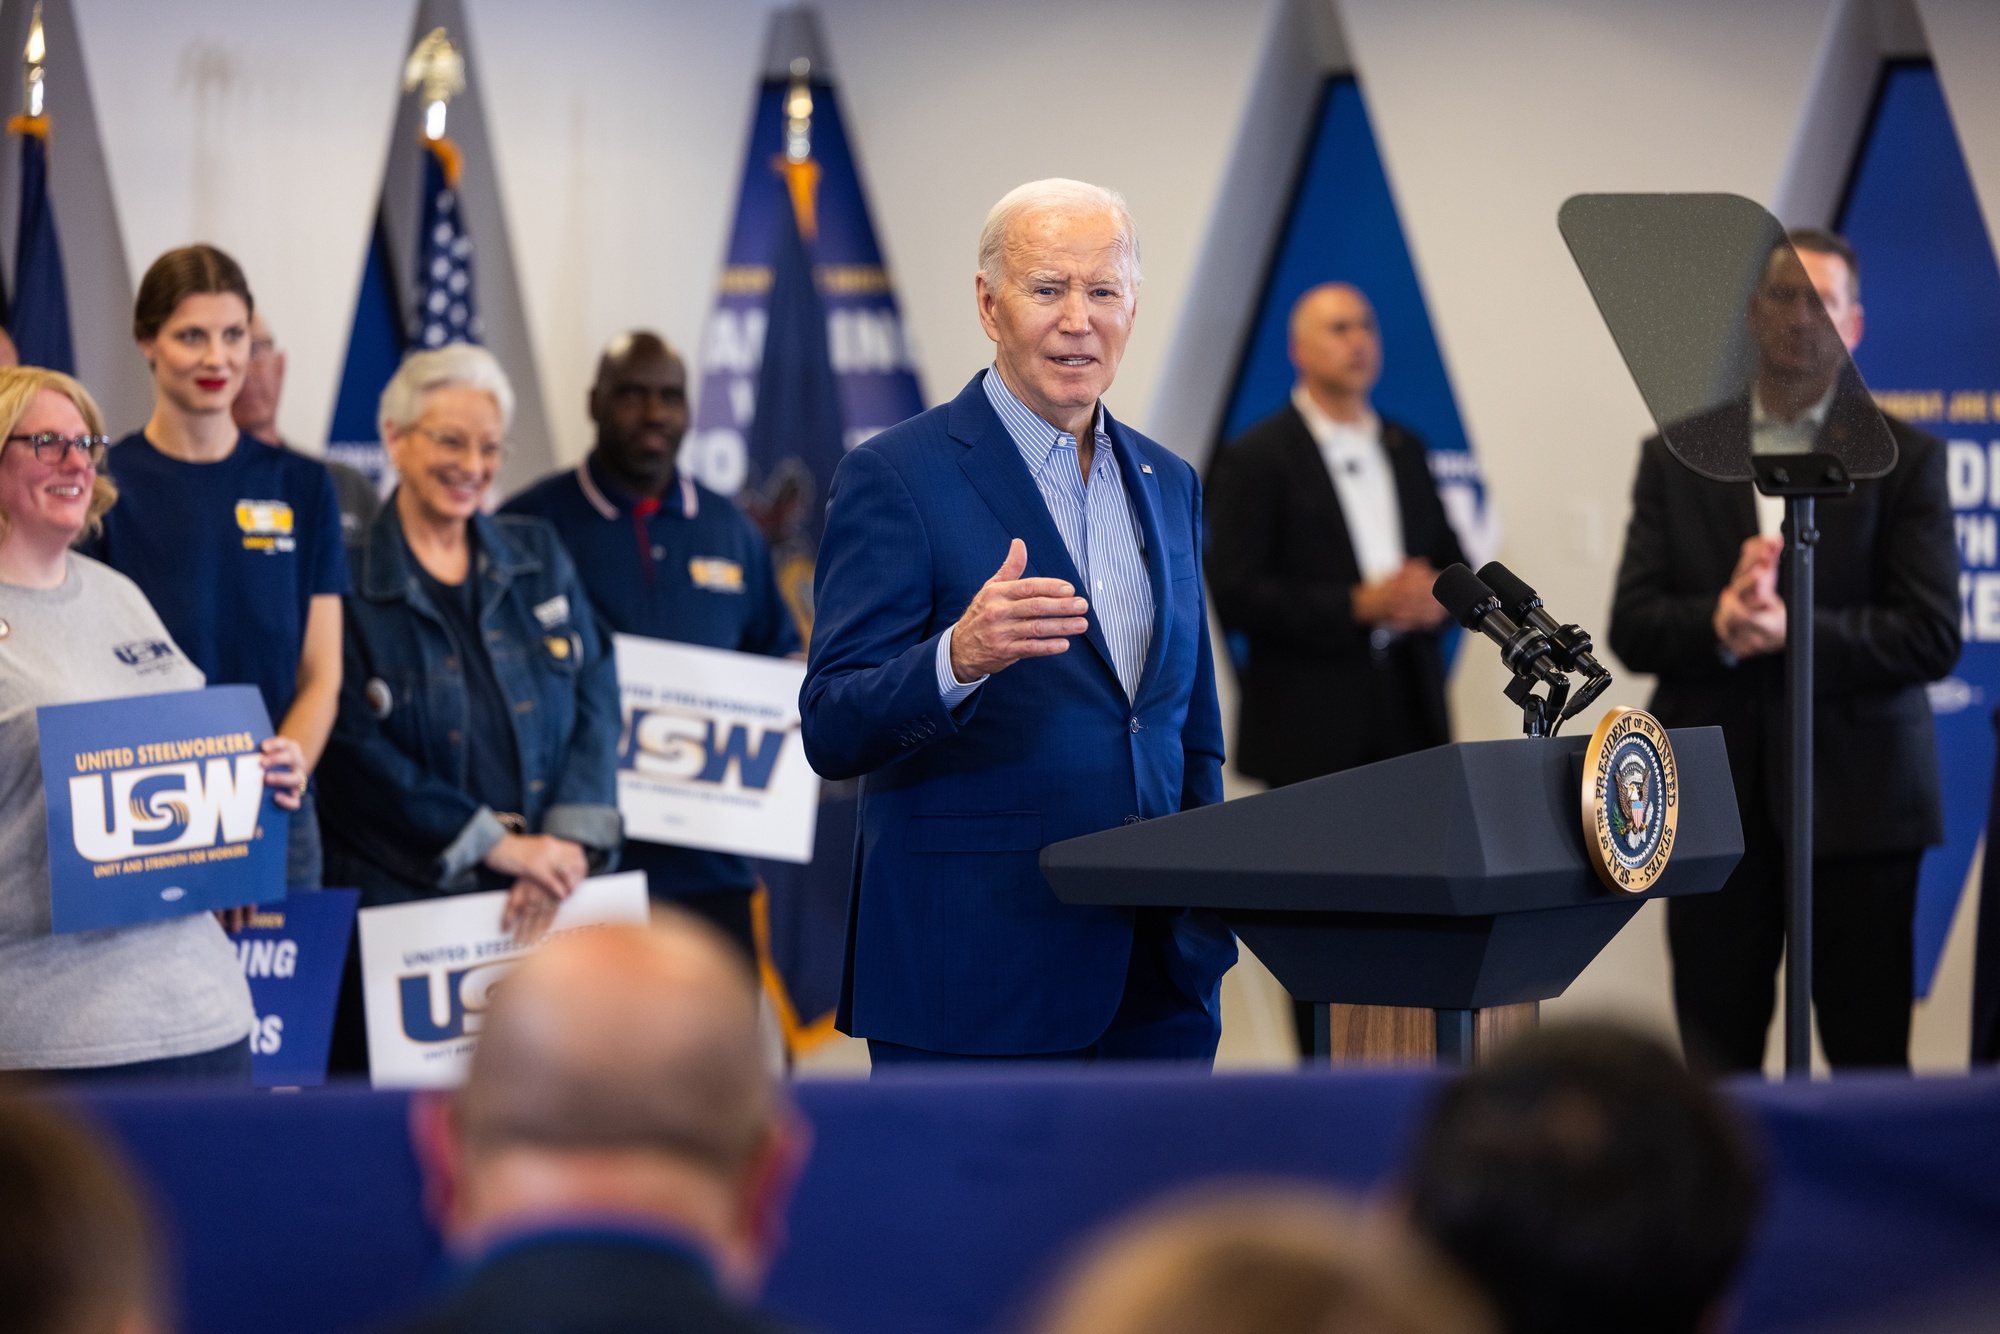 epa11285183 US President Joe Biden calls for tripling tariffs on Chinese steel imports while speaking at the United Steel Workers Headquarters in Pittsburgh, Pennsylvania, USA, 17 April 2024. He also repeatedly attacked his Republican rival for the presidency, Donald Trump. Biden is on the second day of a three-day swing through the swing-state of Pennsylvania, with additional stops in Scranton and Philadelphia.  EPA/JIM LO SCALZO